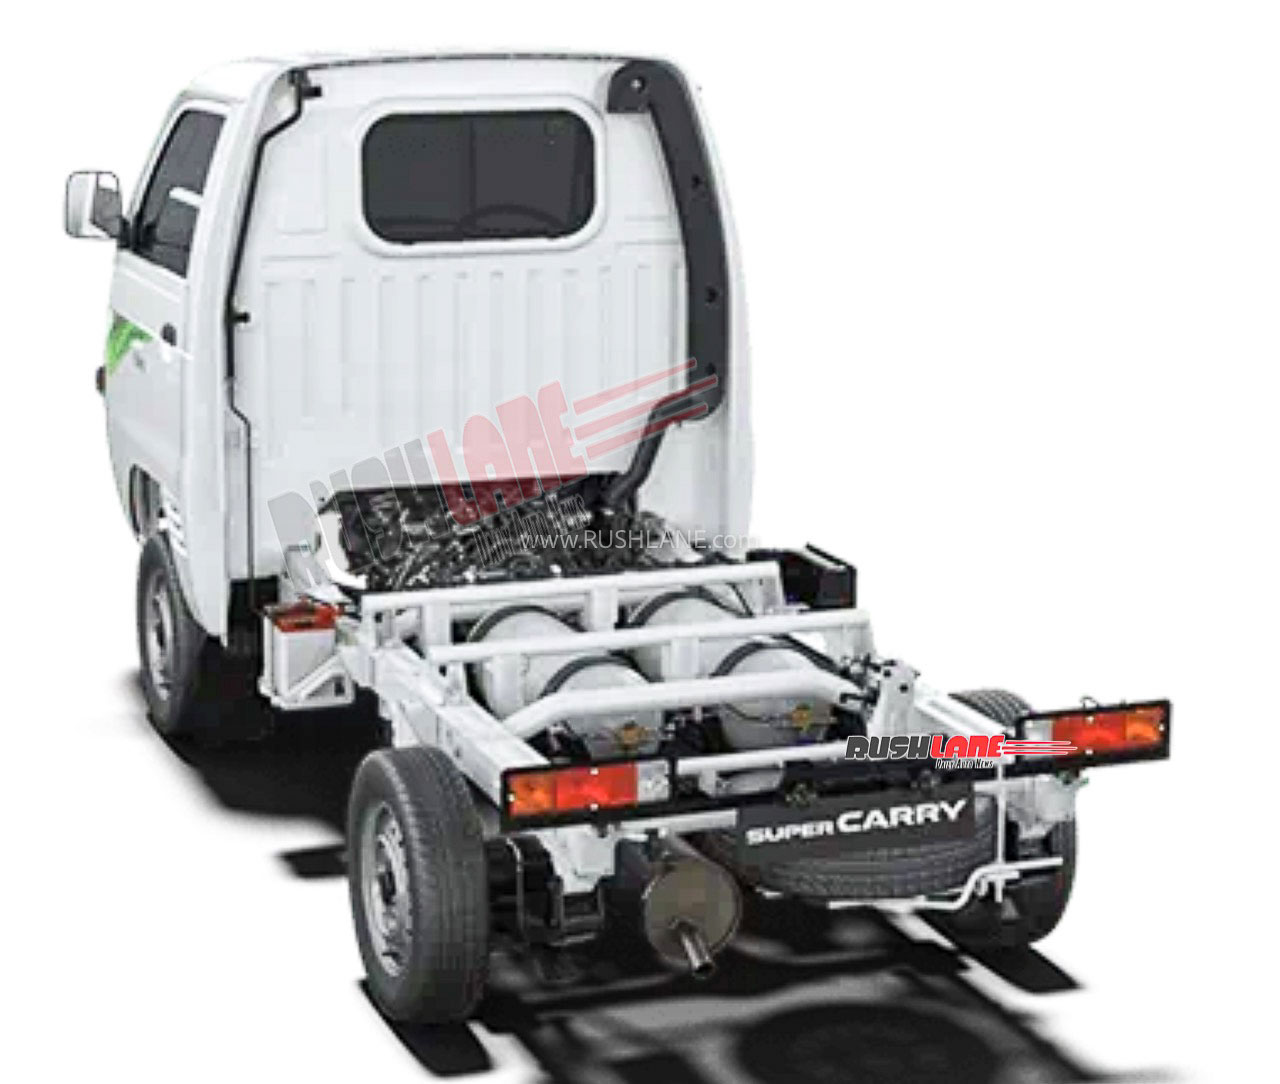 Maruti already offers twin CNG tank with their LCV Super Carry